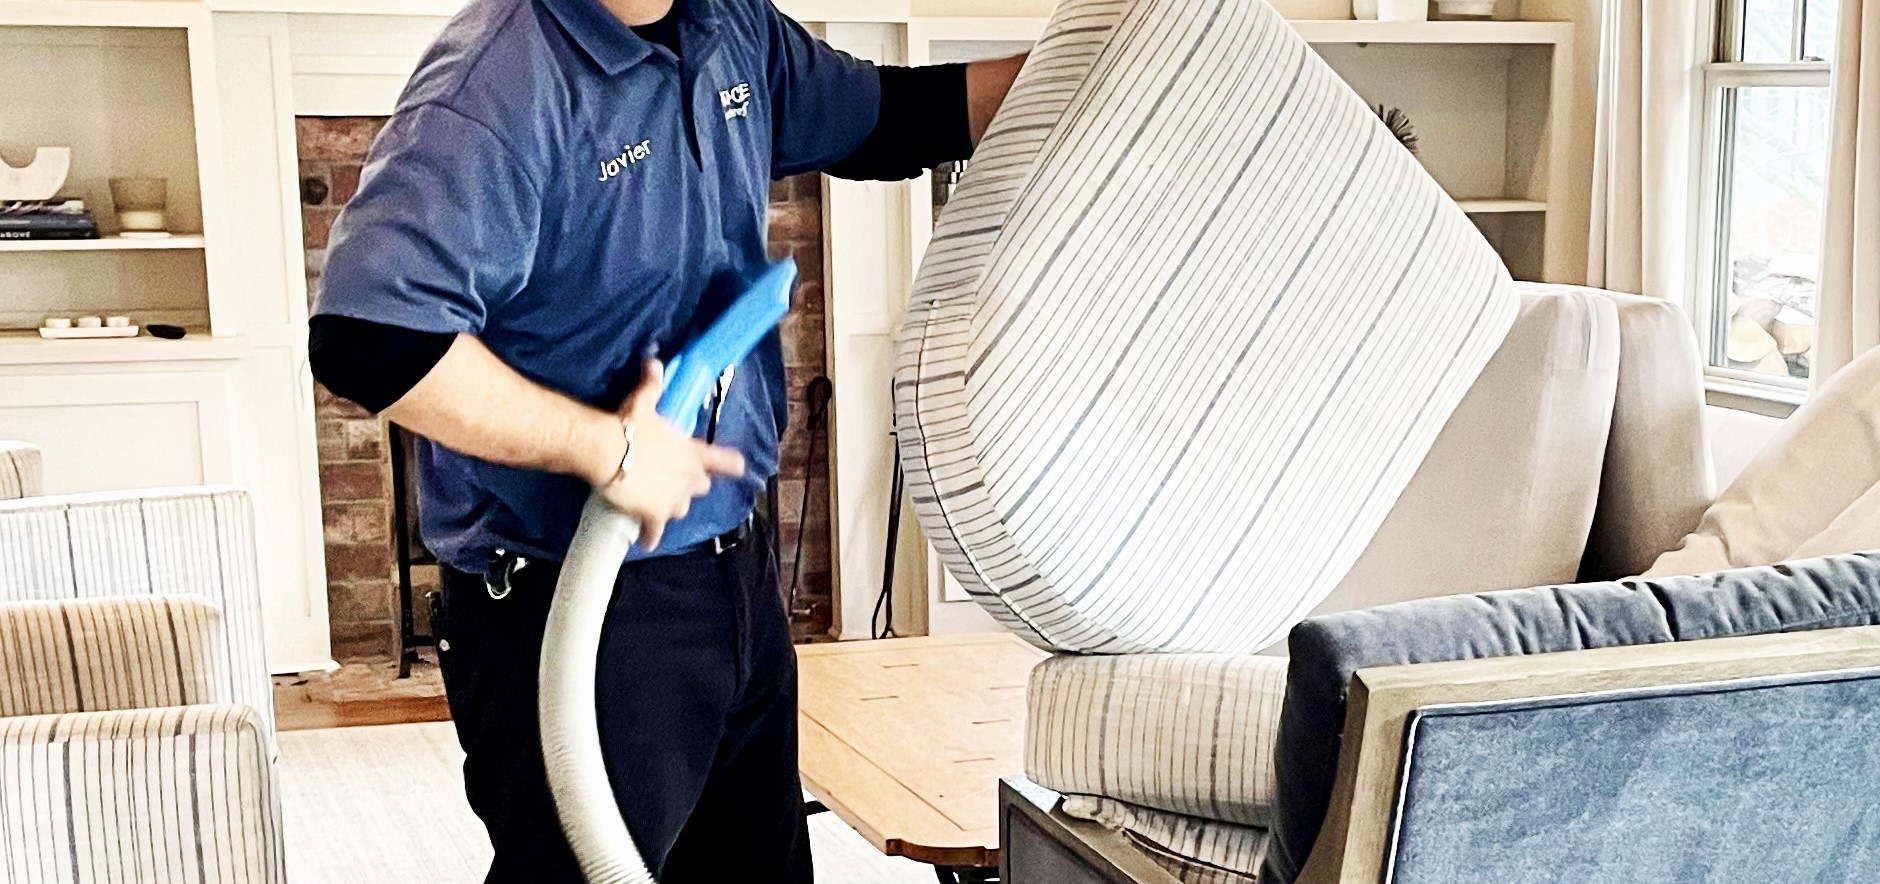 Clearing a space in preparation for upholstery cleaning helps technicians work more efficiently and keeps family members and pets safe.